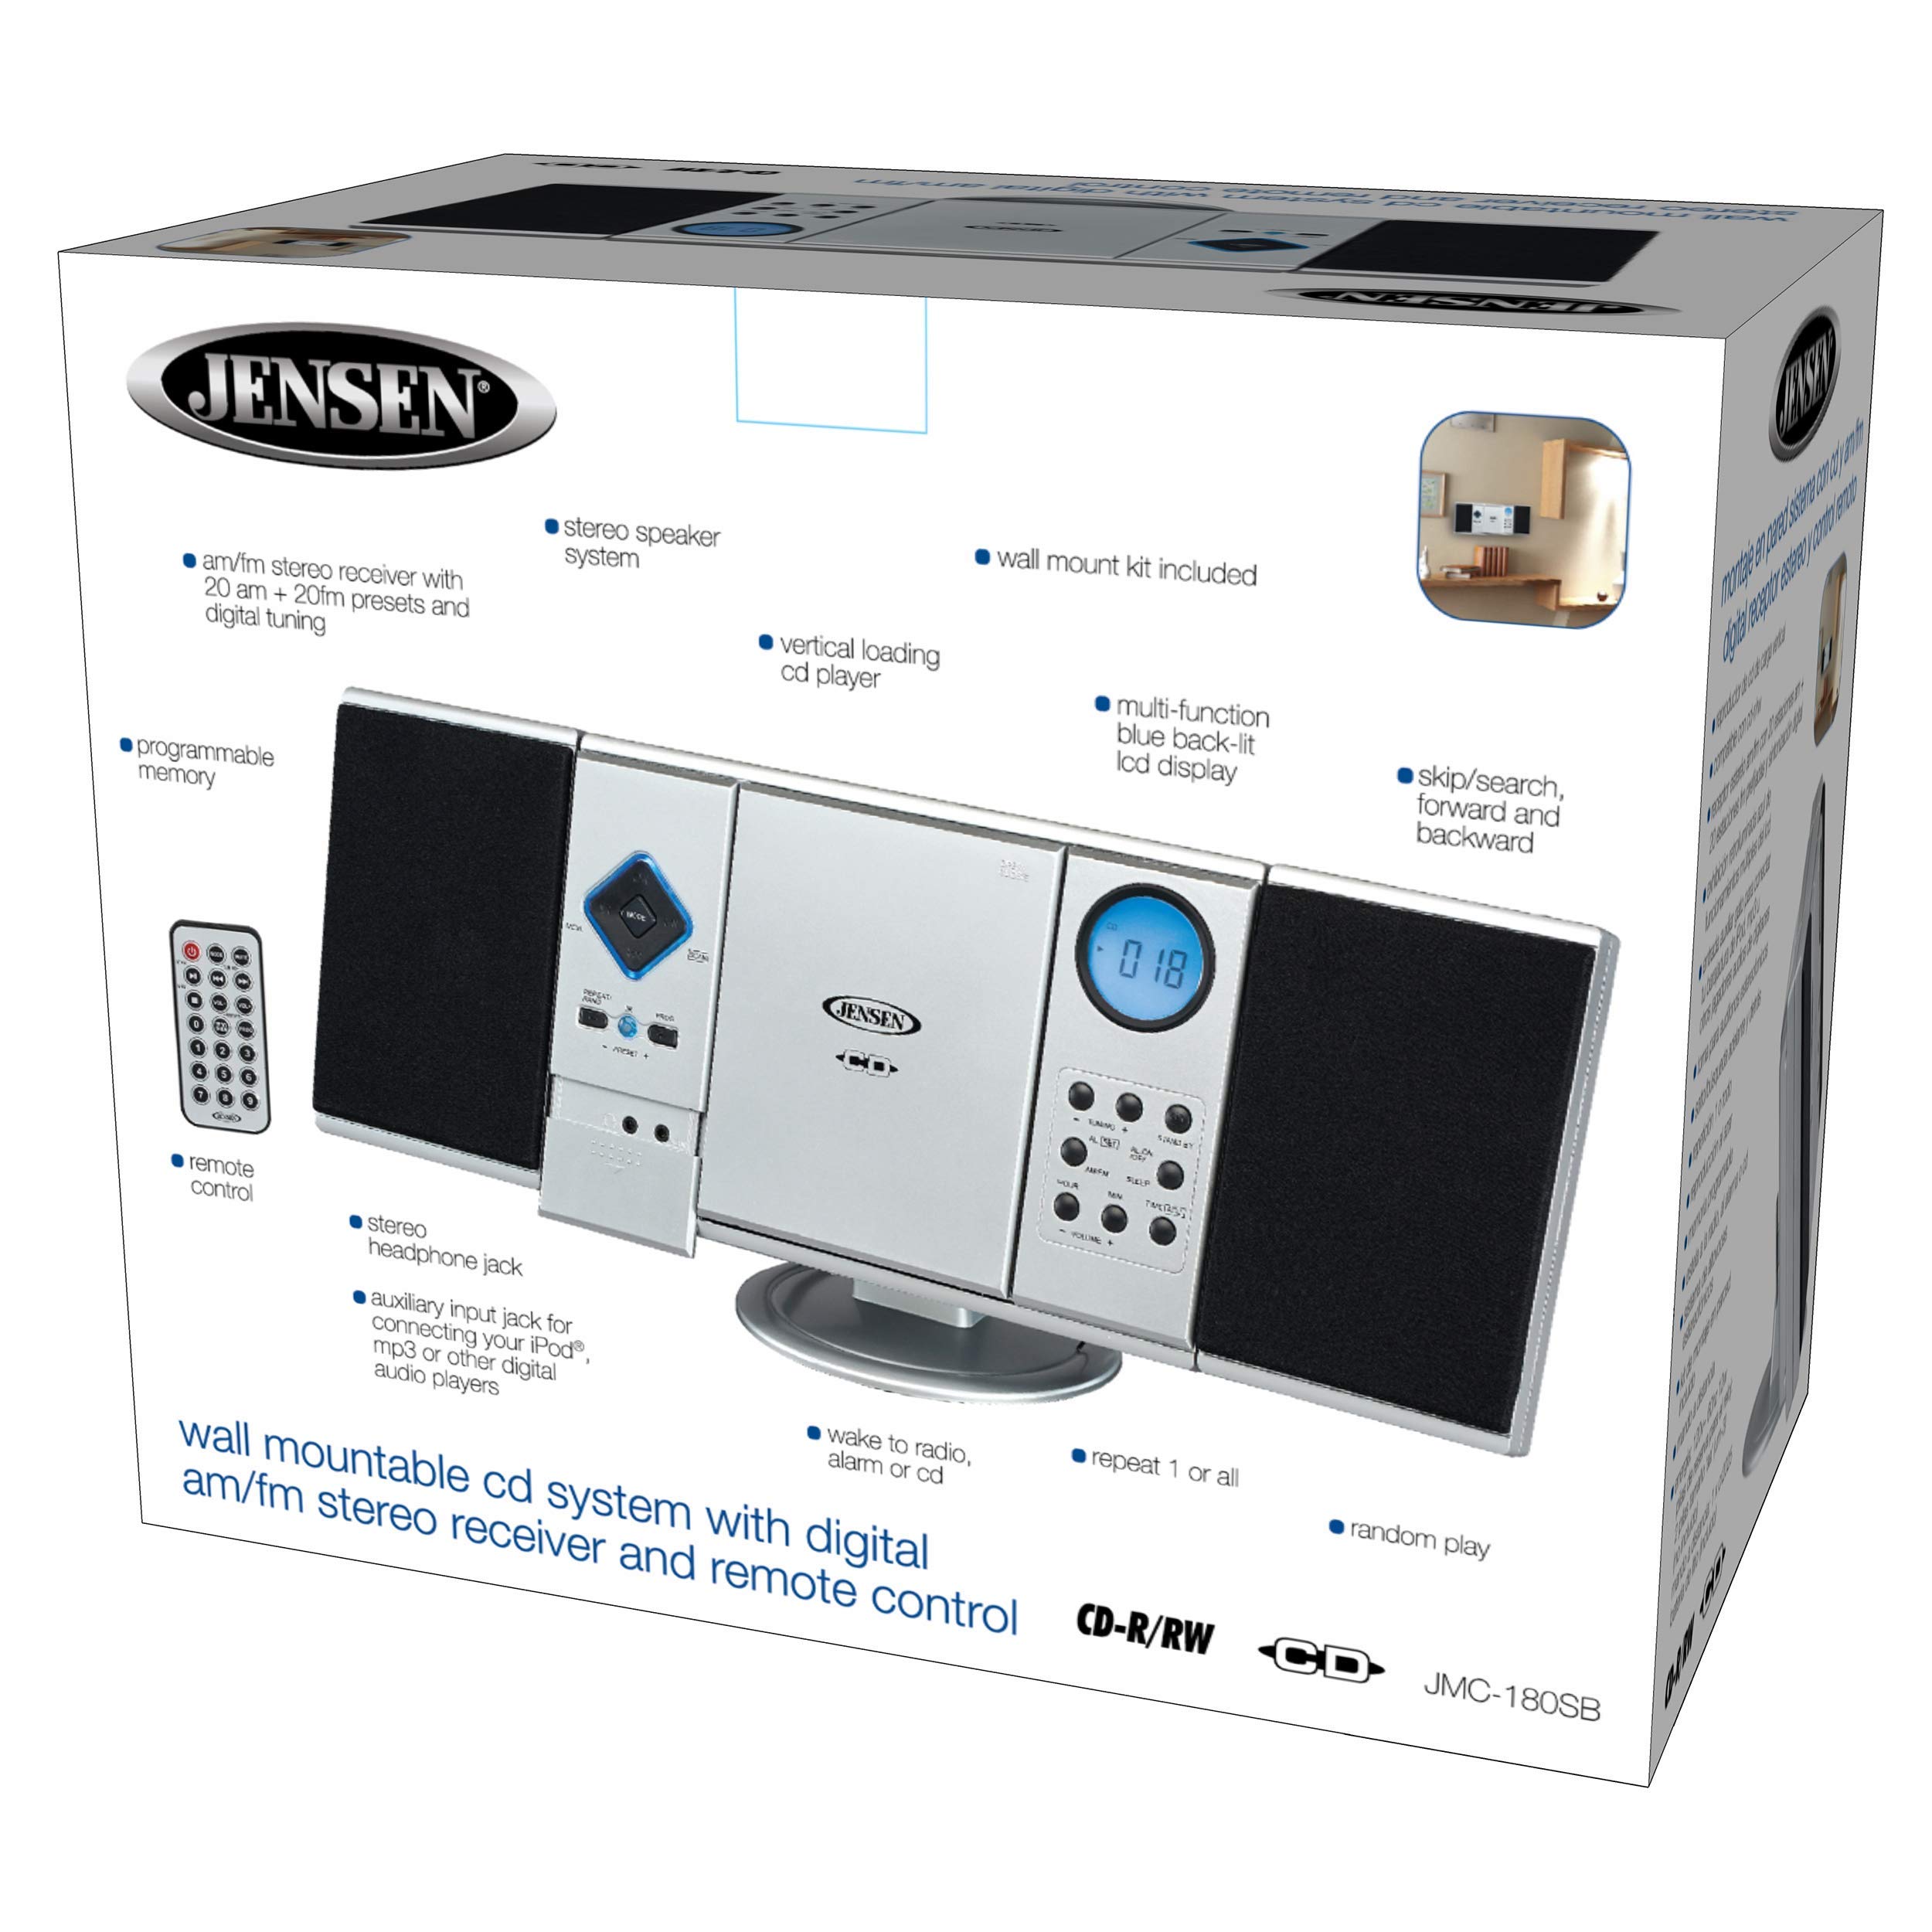 Jensen Modern Black Series JMC-180 Silver Wall Mountable Vertical Loading CD Music System, Digital AM/FM Stereo with Speakers, Aux-in, & Headphone Jack Remote Control (Silver)